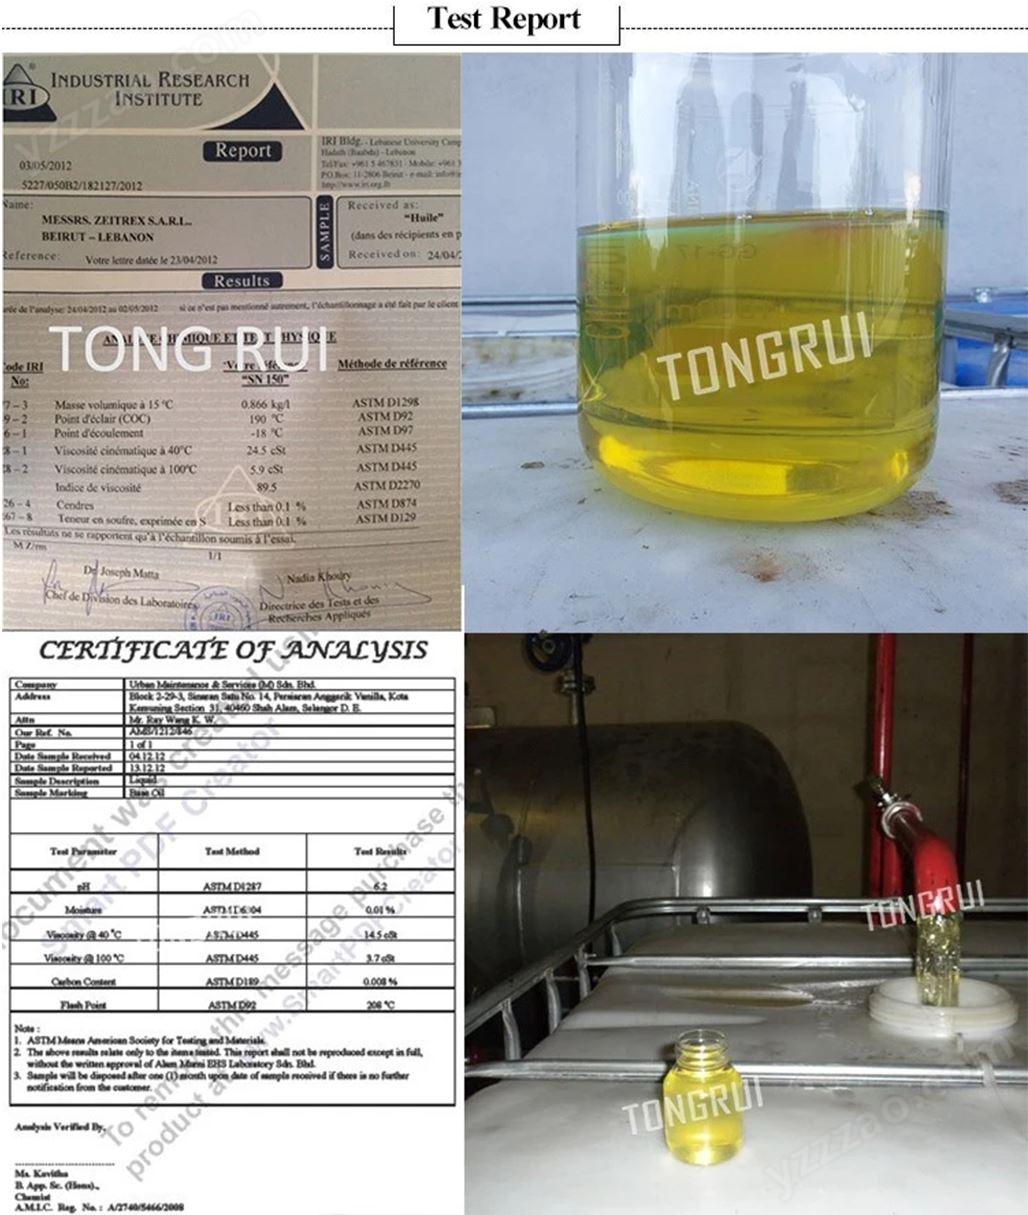 base oil of test report